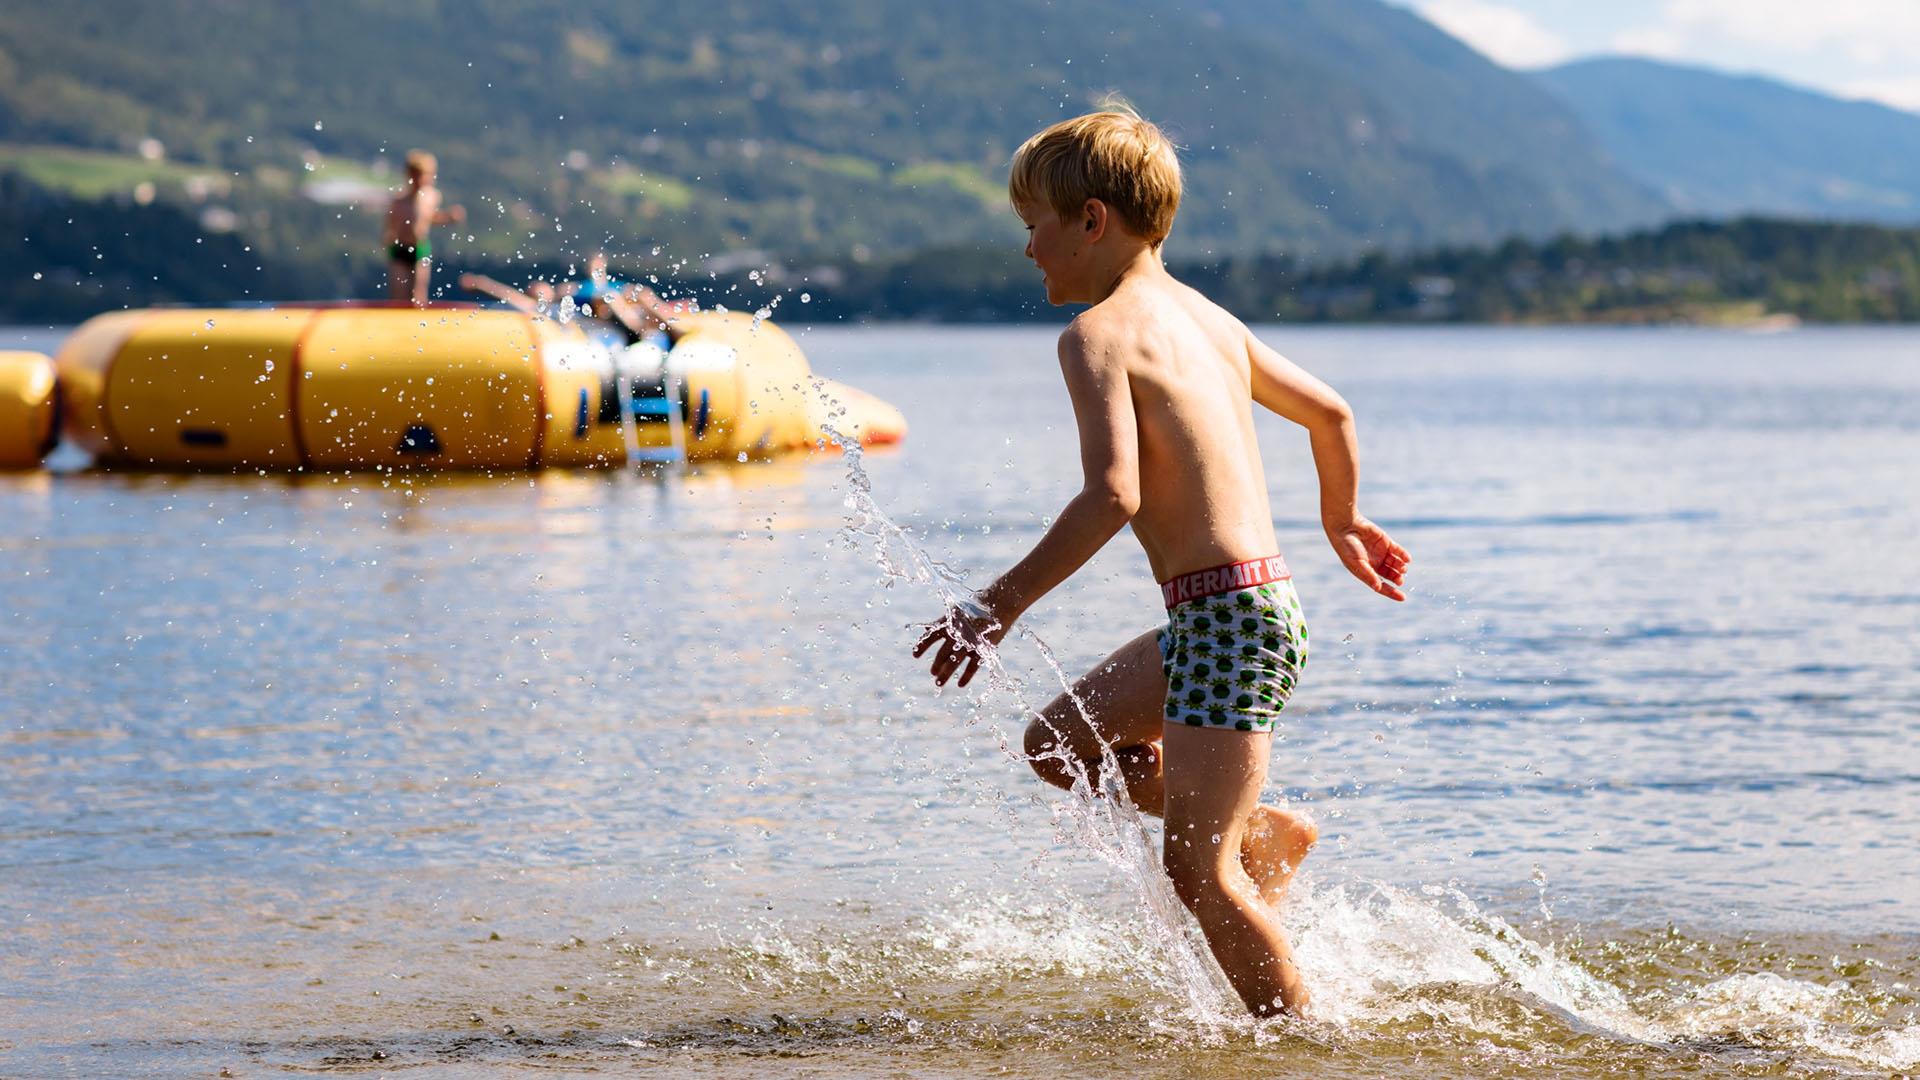 A bøy runs into a lake with a yellow inflateable play raft further out in the water.